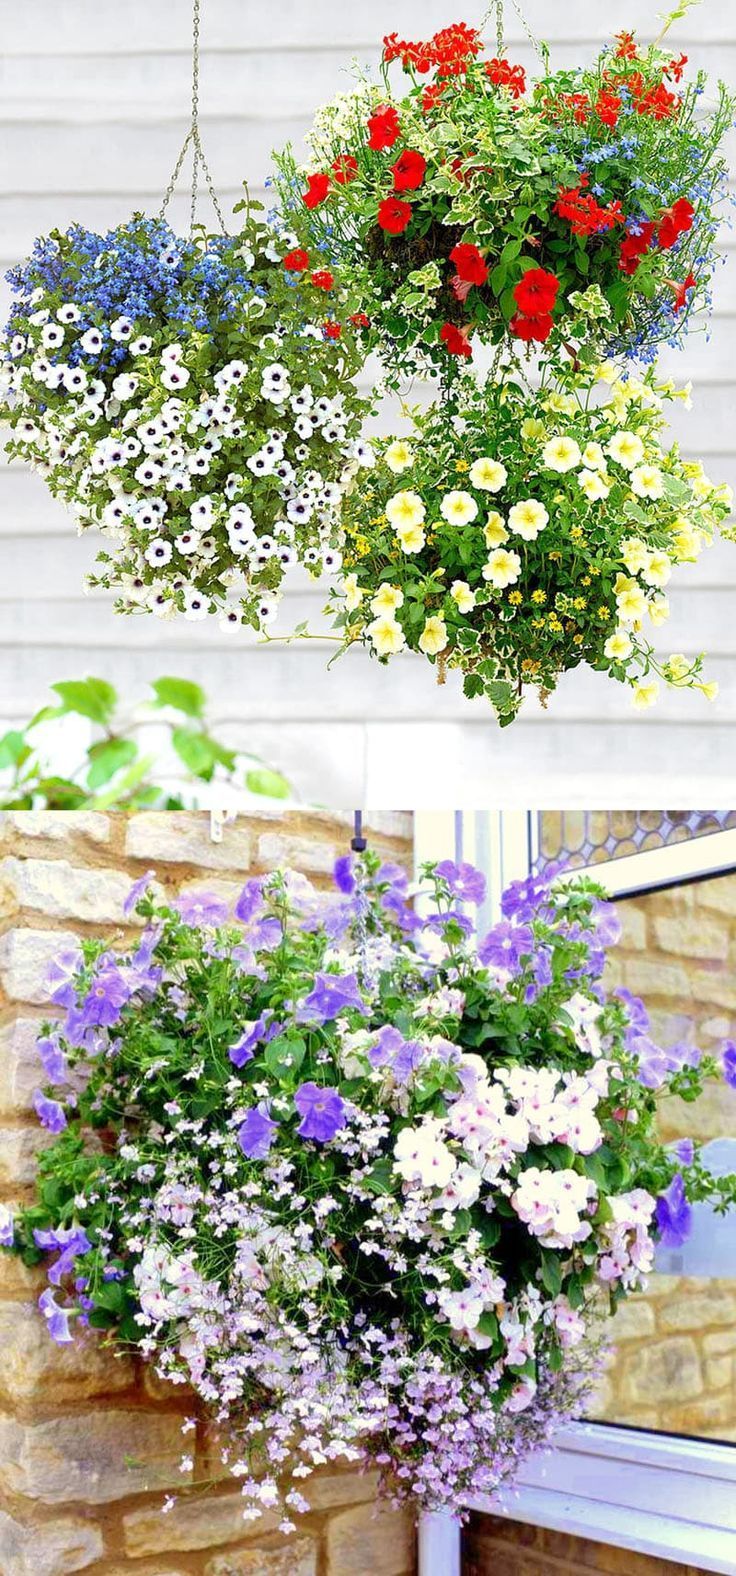 How to Plant Beautiful Flower Hanging Baskets ( & 20+ Best Hanging basket plants ) -   18 plants Flowers in hanging baskets ideas